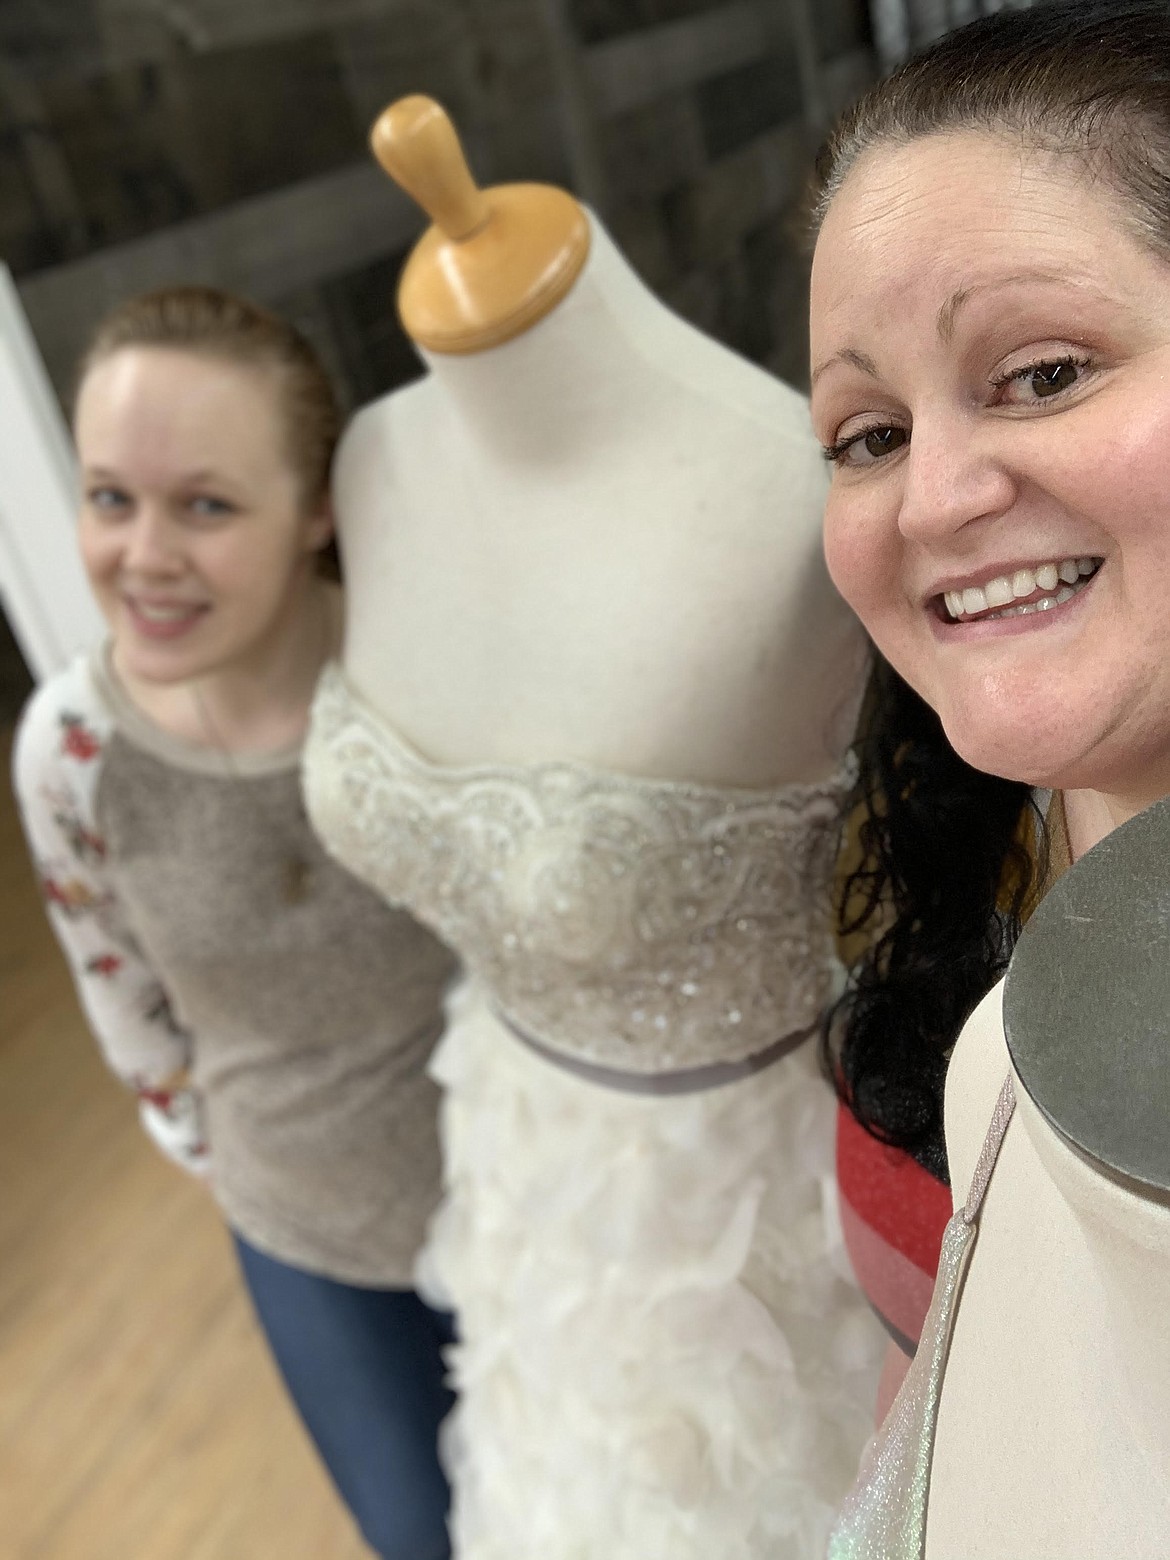 Courtesy photo
Erika Bates and Emily Applegate are ready to help customers at Affordable Bridal & Tuxedo in its new location in Suite G at 3650 N. Government Way. The new site is scheduled to open Thursday.